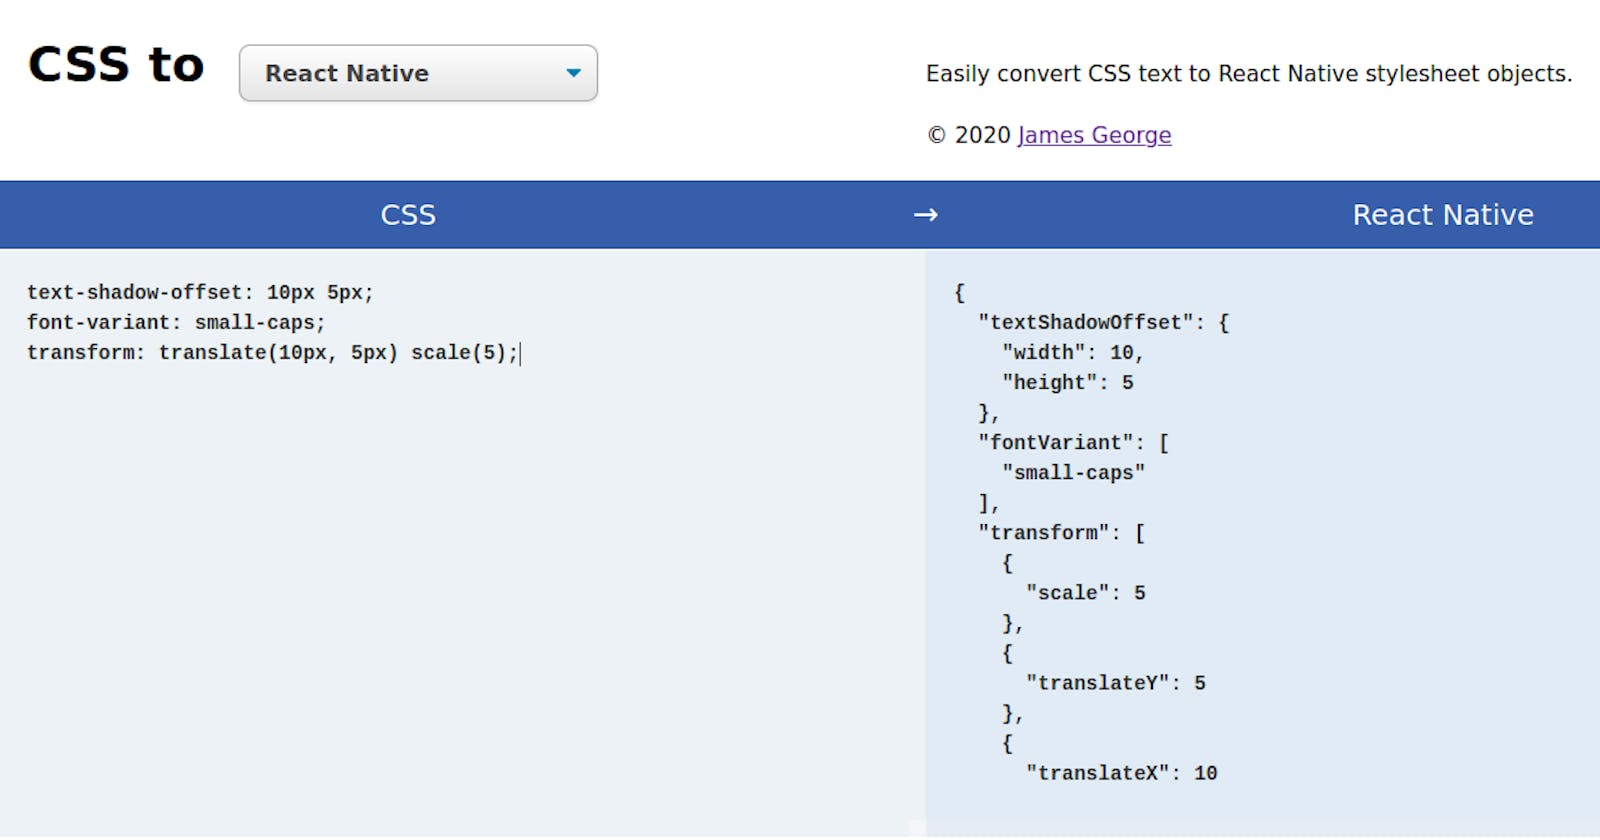 csstox - Convert CSS snippets to React Native / JSS stylesheet objects with ease